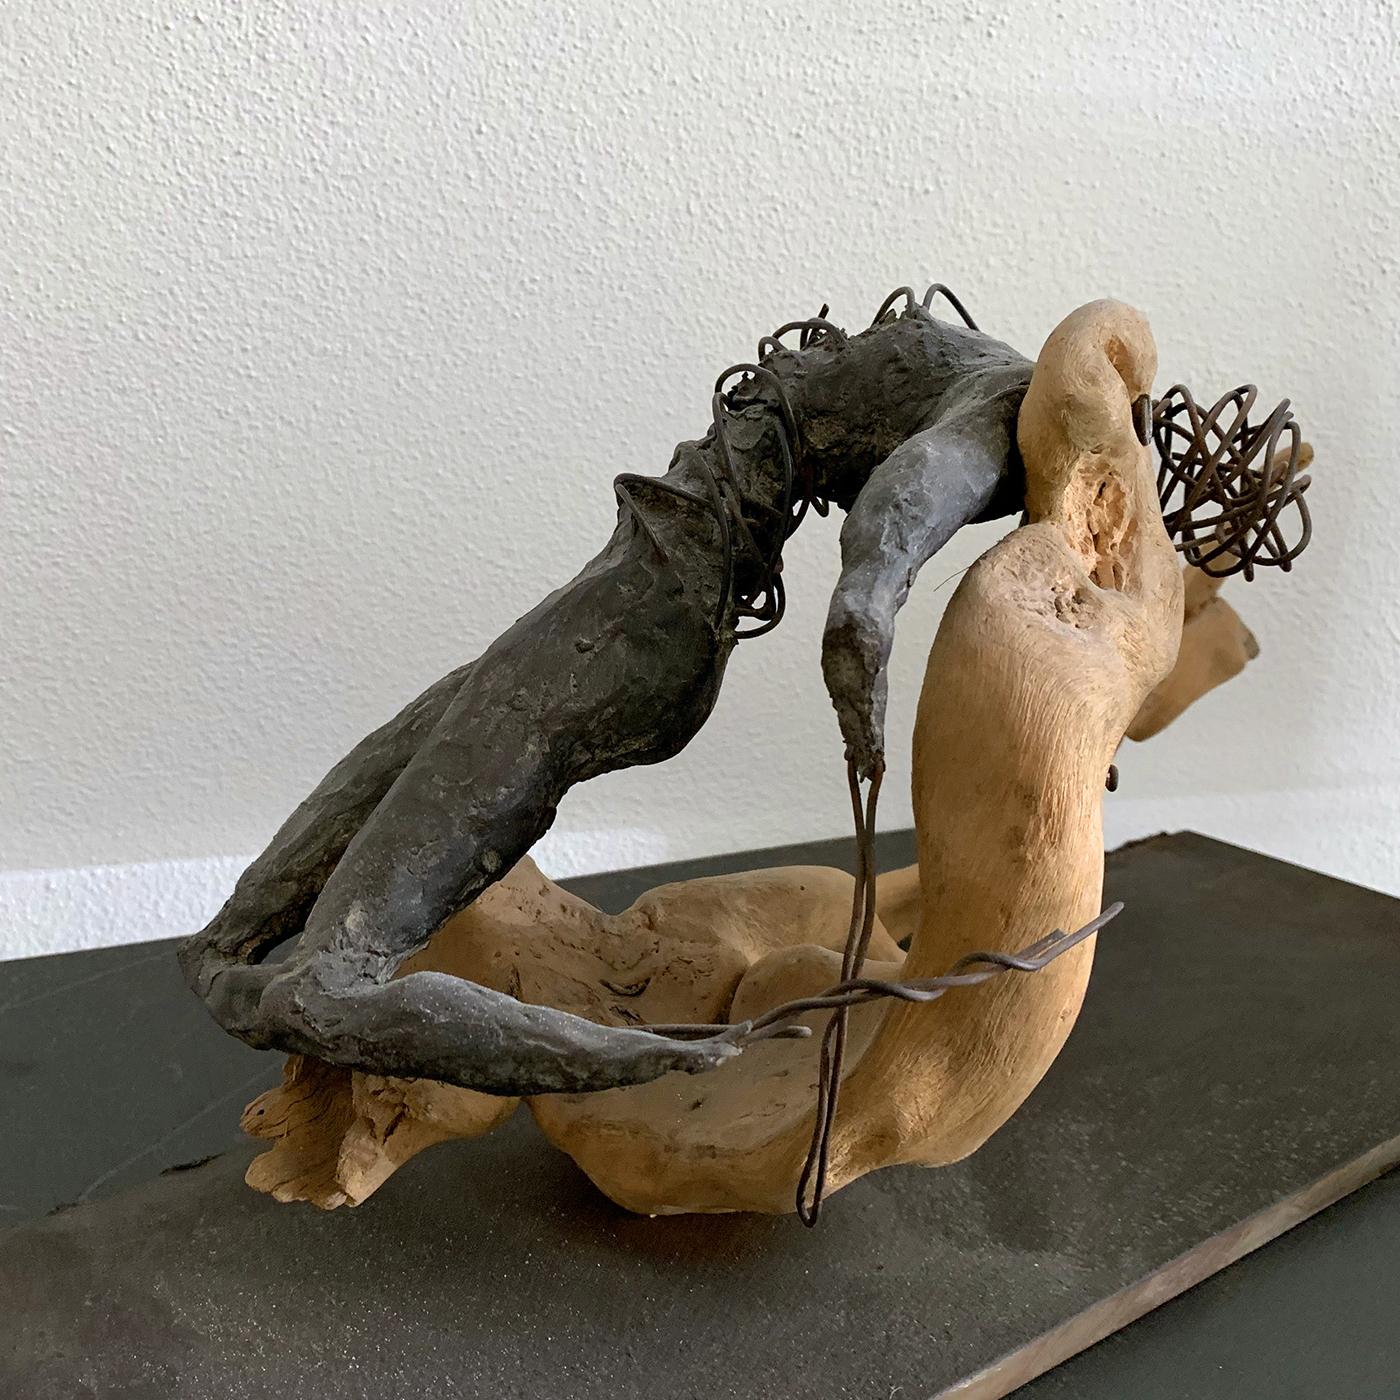 A magnificent piece of refined allure, this sculpture merges feelings of solitude, freedom, and peace in a female resting body. Exquisitely crafted of bronze using the ancient method of lost wax, the lying figure is wrapped up with copper wire